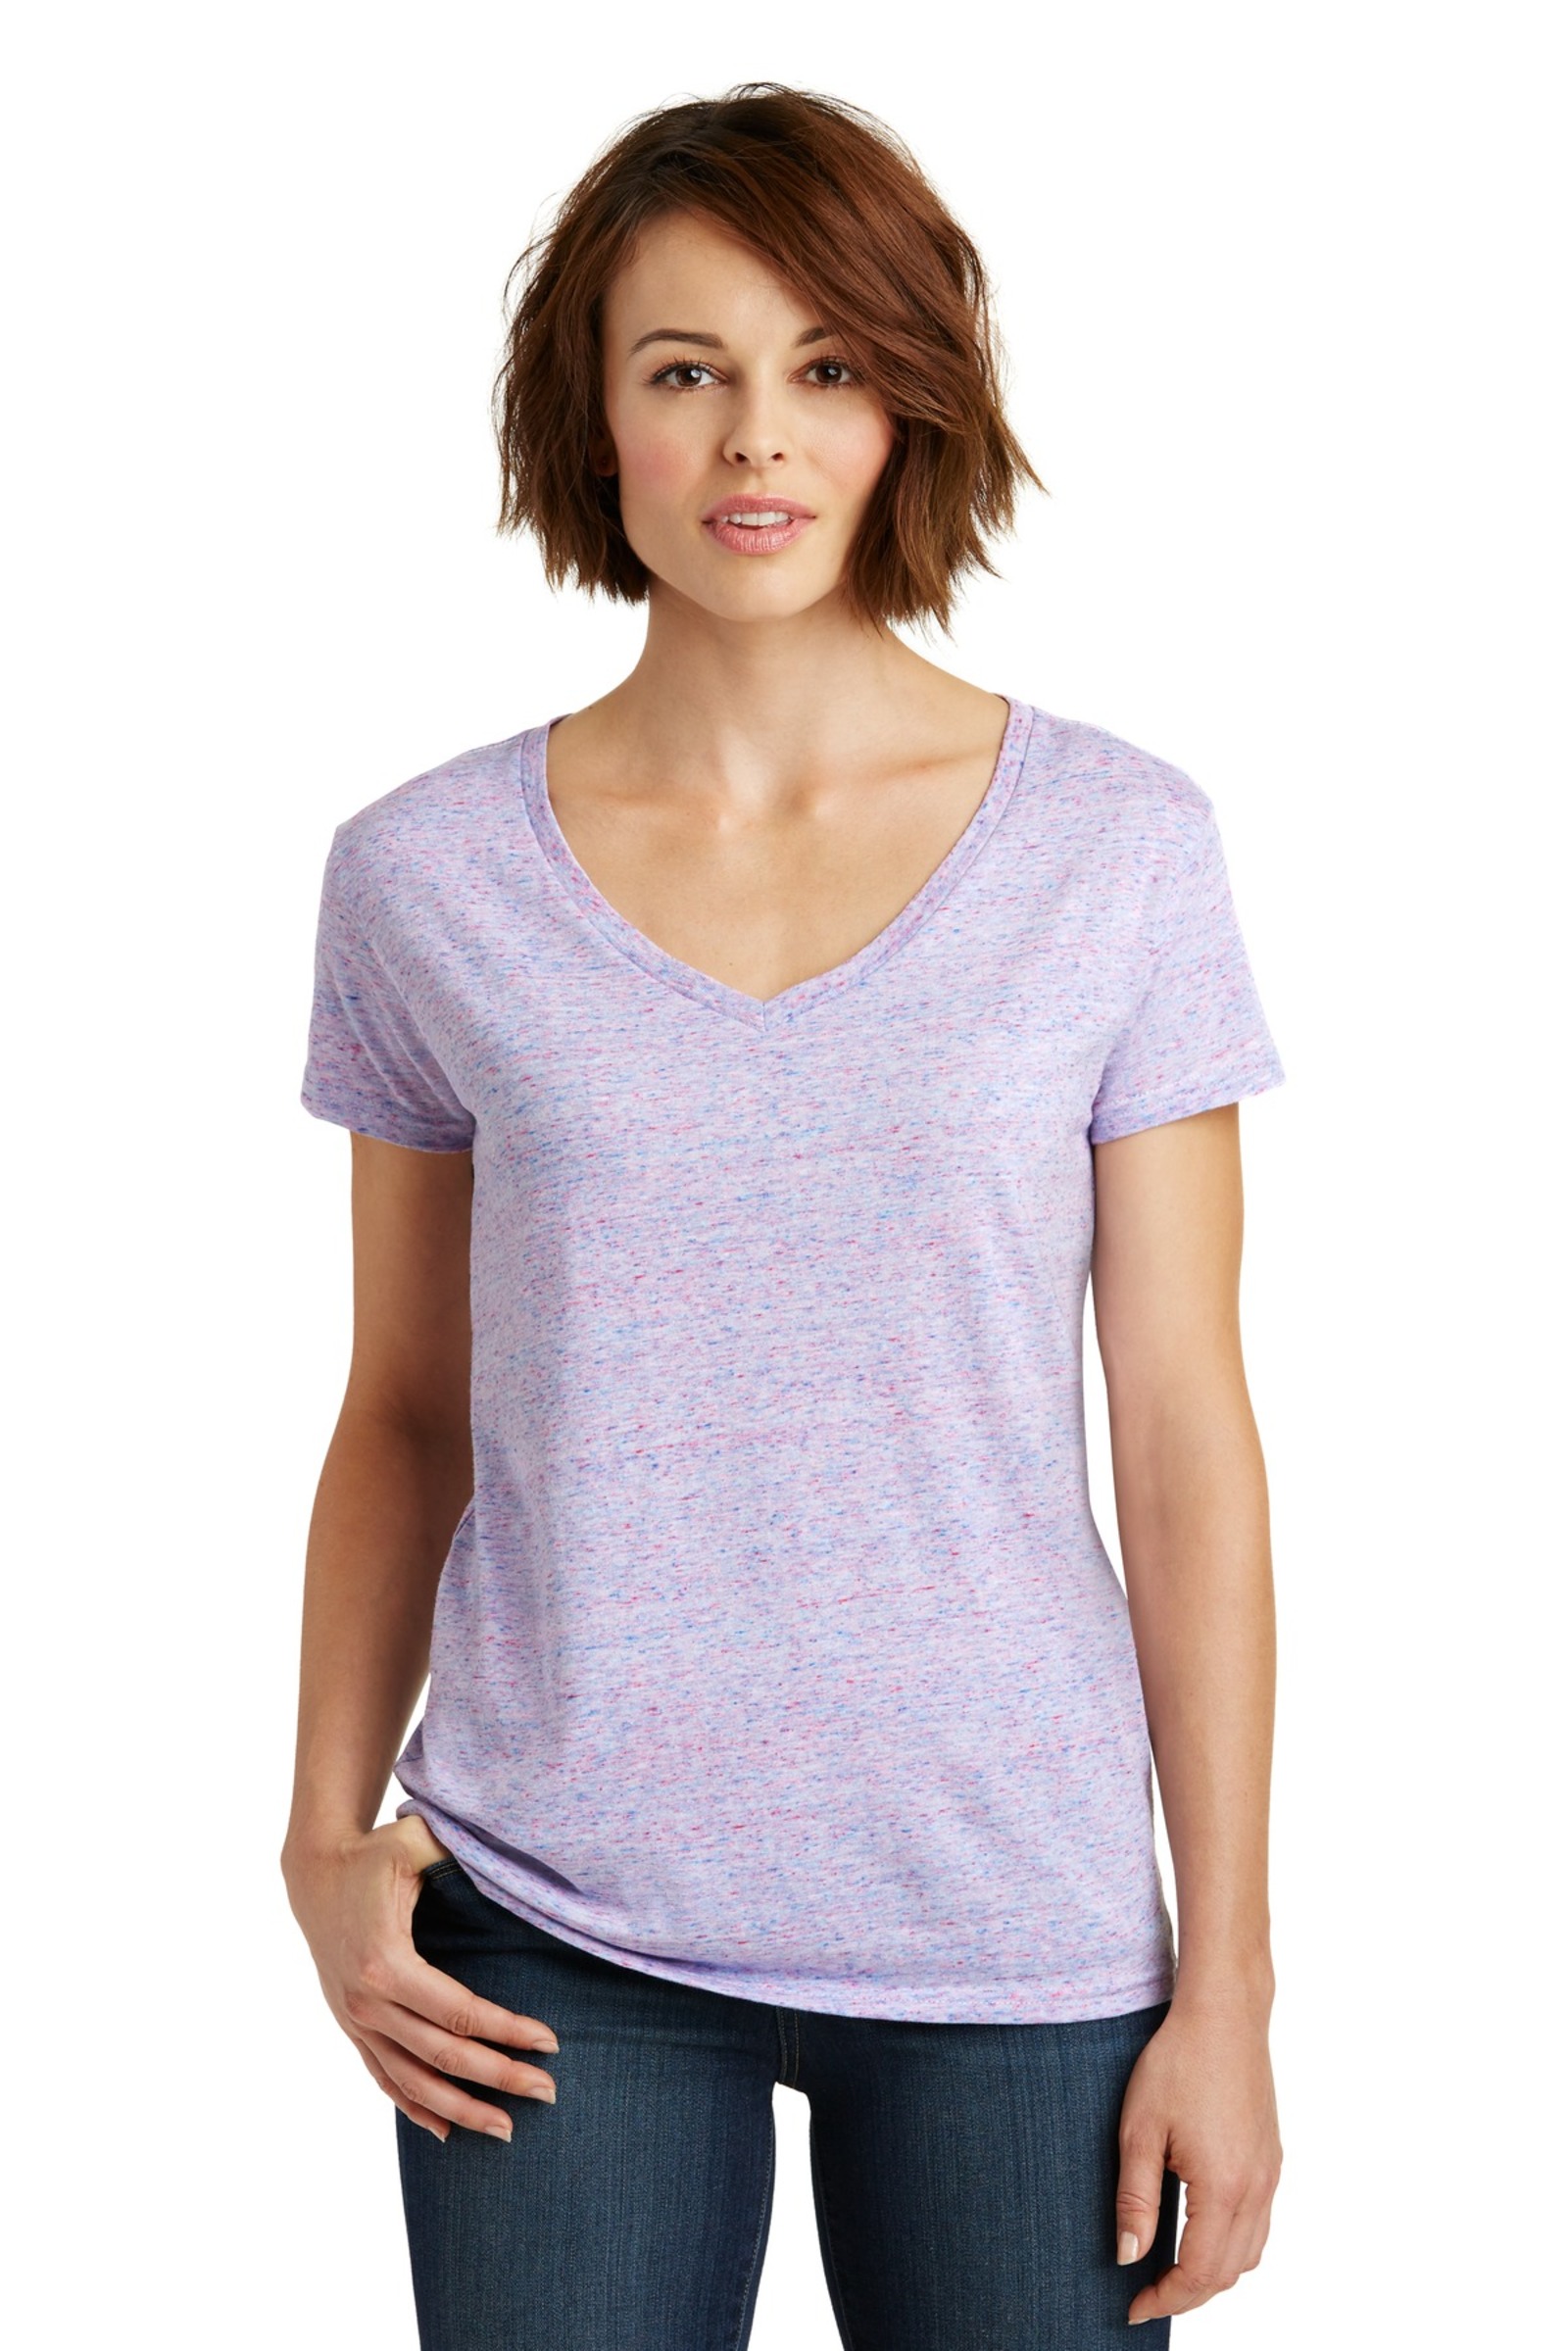  District Made Printed Women's Cosmic Relaxed V-Neck Tee